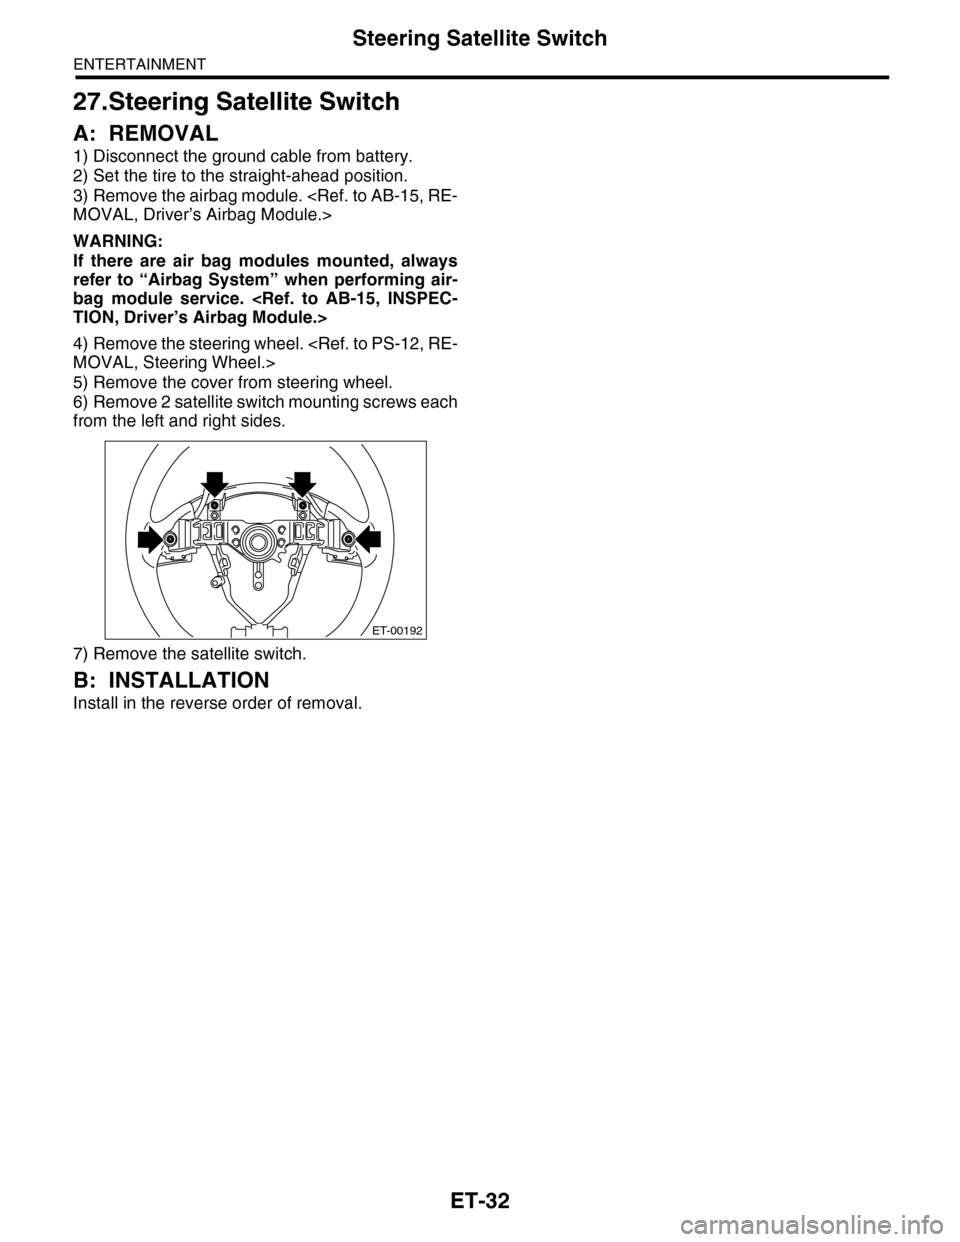 SUBARU TRIBECA 2009 1.G Service Workshop Manual ET-32
Steering Satellite Switch
ENTERTAINMENT
27.Steering Satellite Switch
A: REMOVAL
1) Disconnect the ground cable from battery.
2) Set the tire to the straight-ahead position.
3) Remove the airbag 